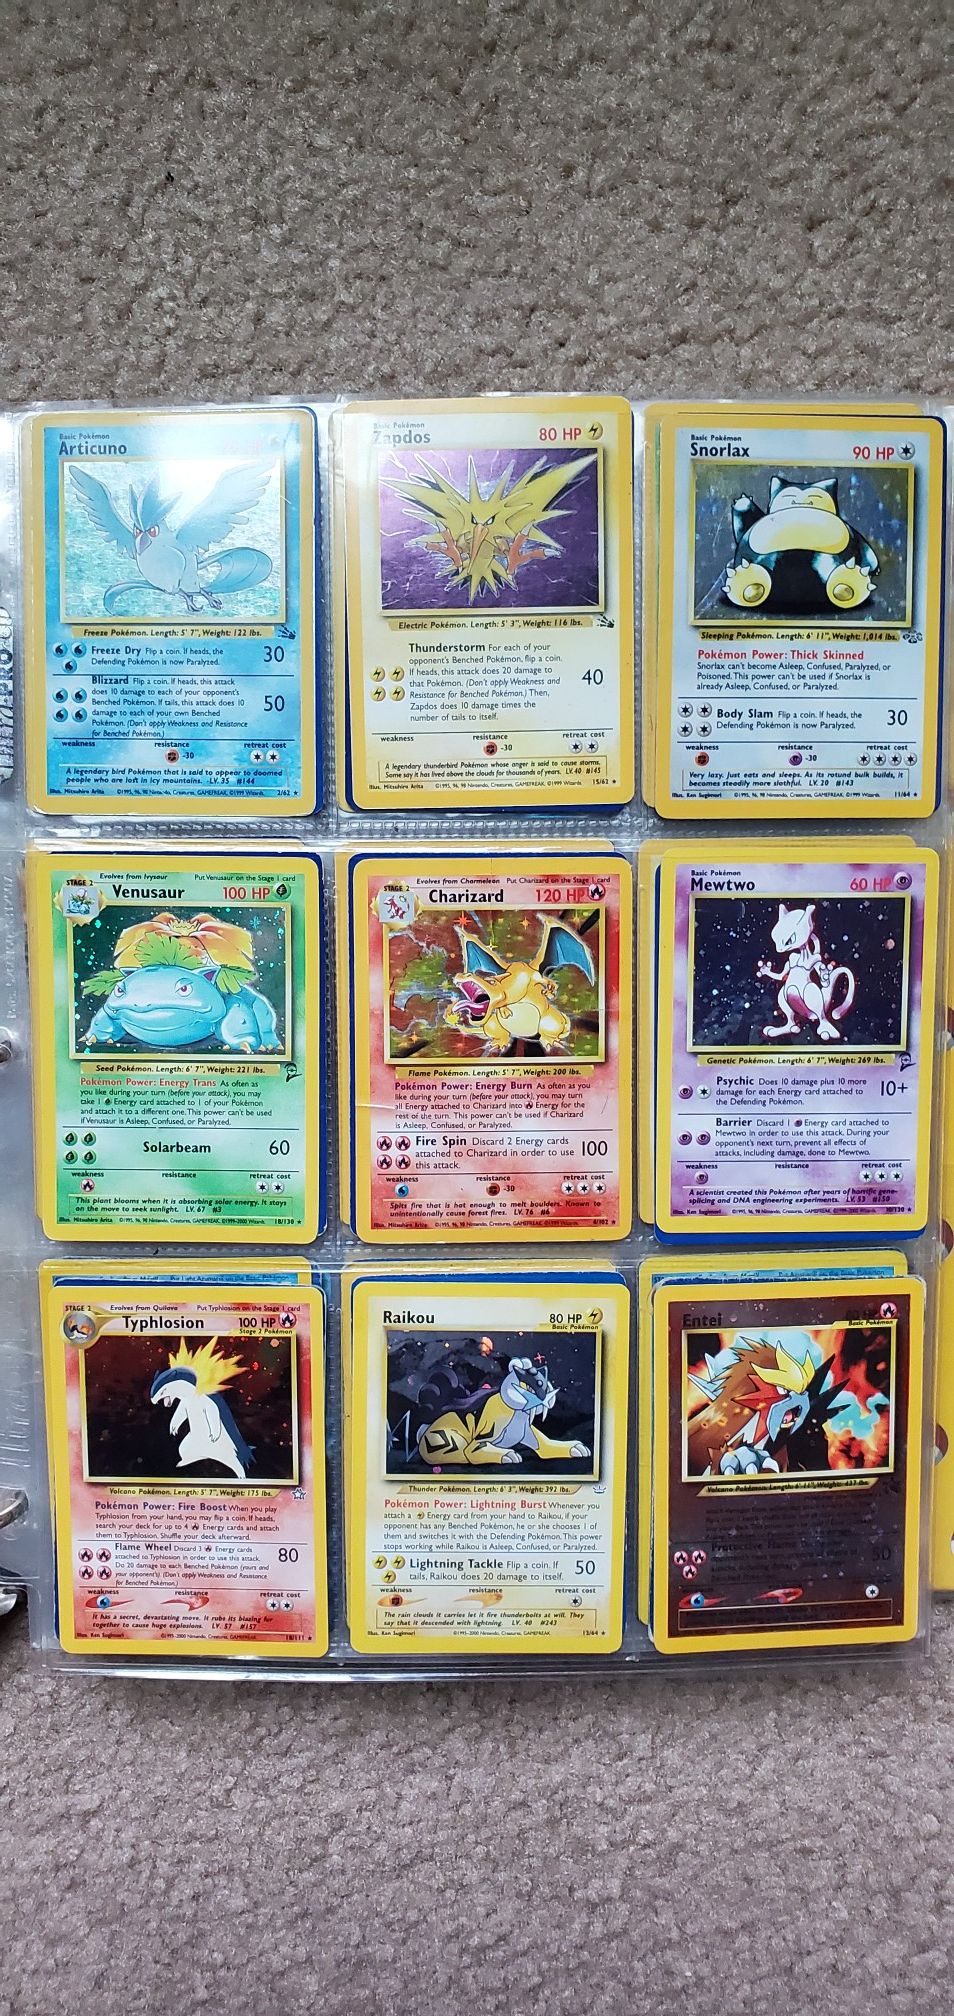 Collection of Nintendo old school and new Gen pokemon cards (including Charizard)